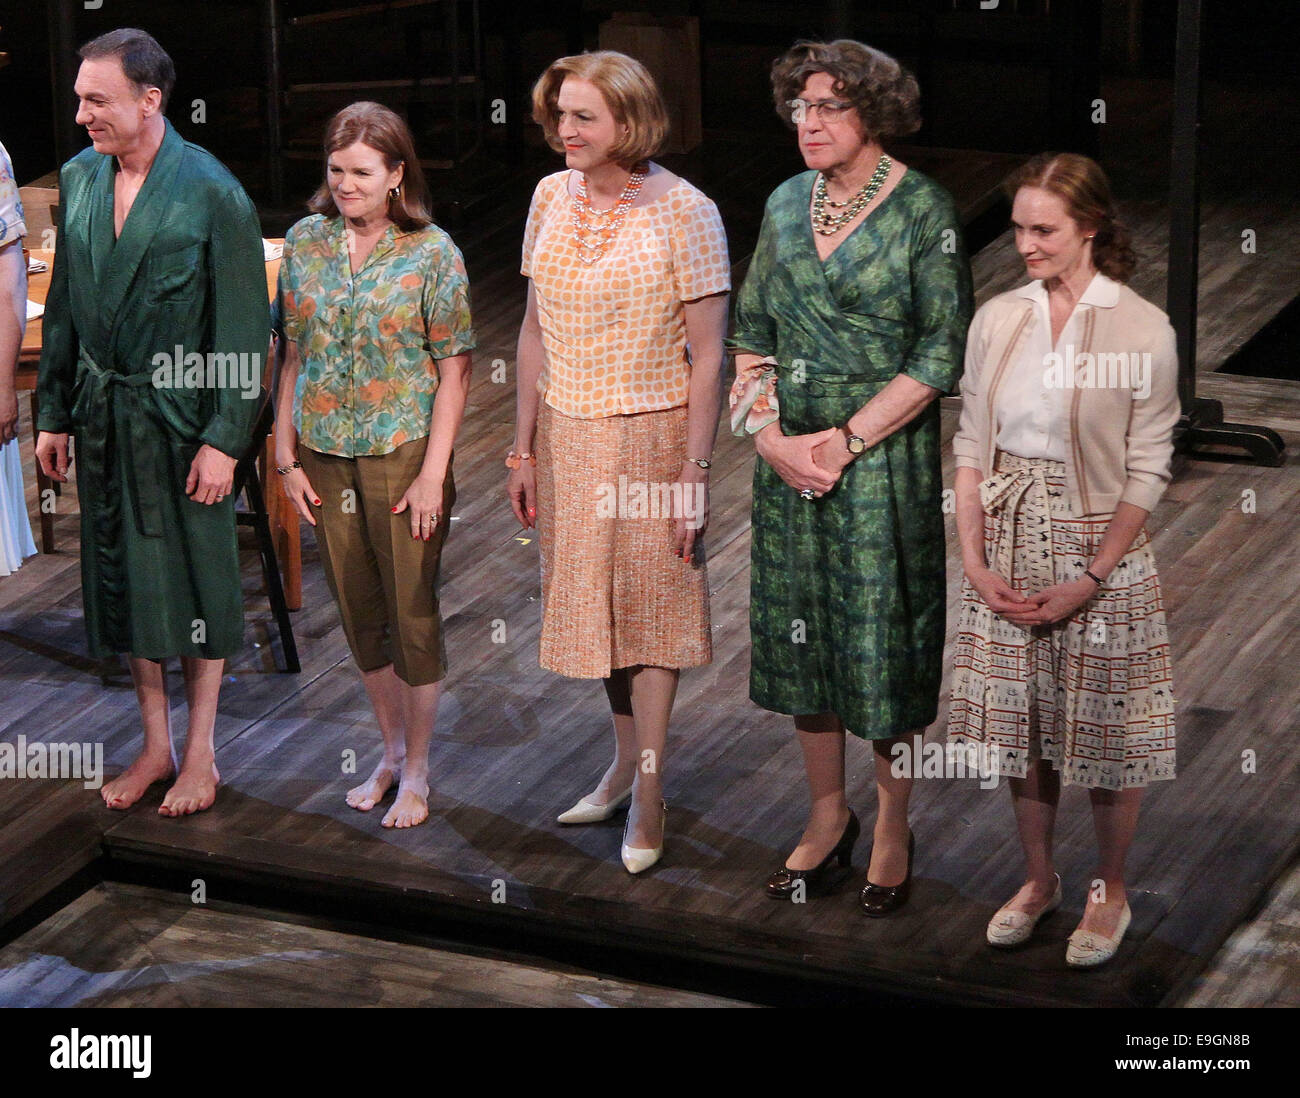 Opening night curtain call for Broadway's Casa Valentina at the Samuel J. Friedman Theatre.  Featuring: Patrick Page,Mare Winningham,Reed Birney,Larry Pine,Lisa Emery Where: New York, New York, United States When: 24 Apr 2014 Stock Photo